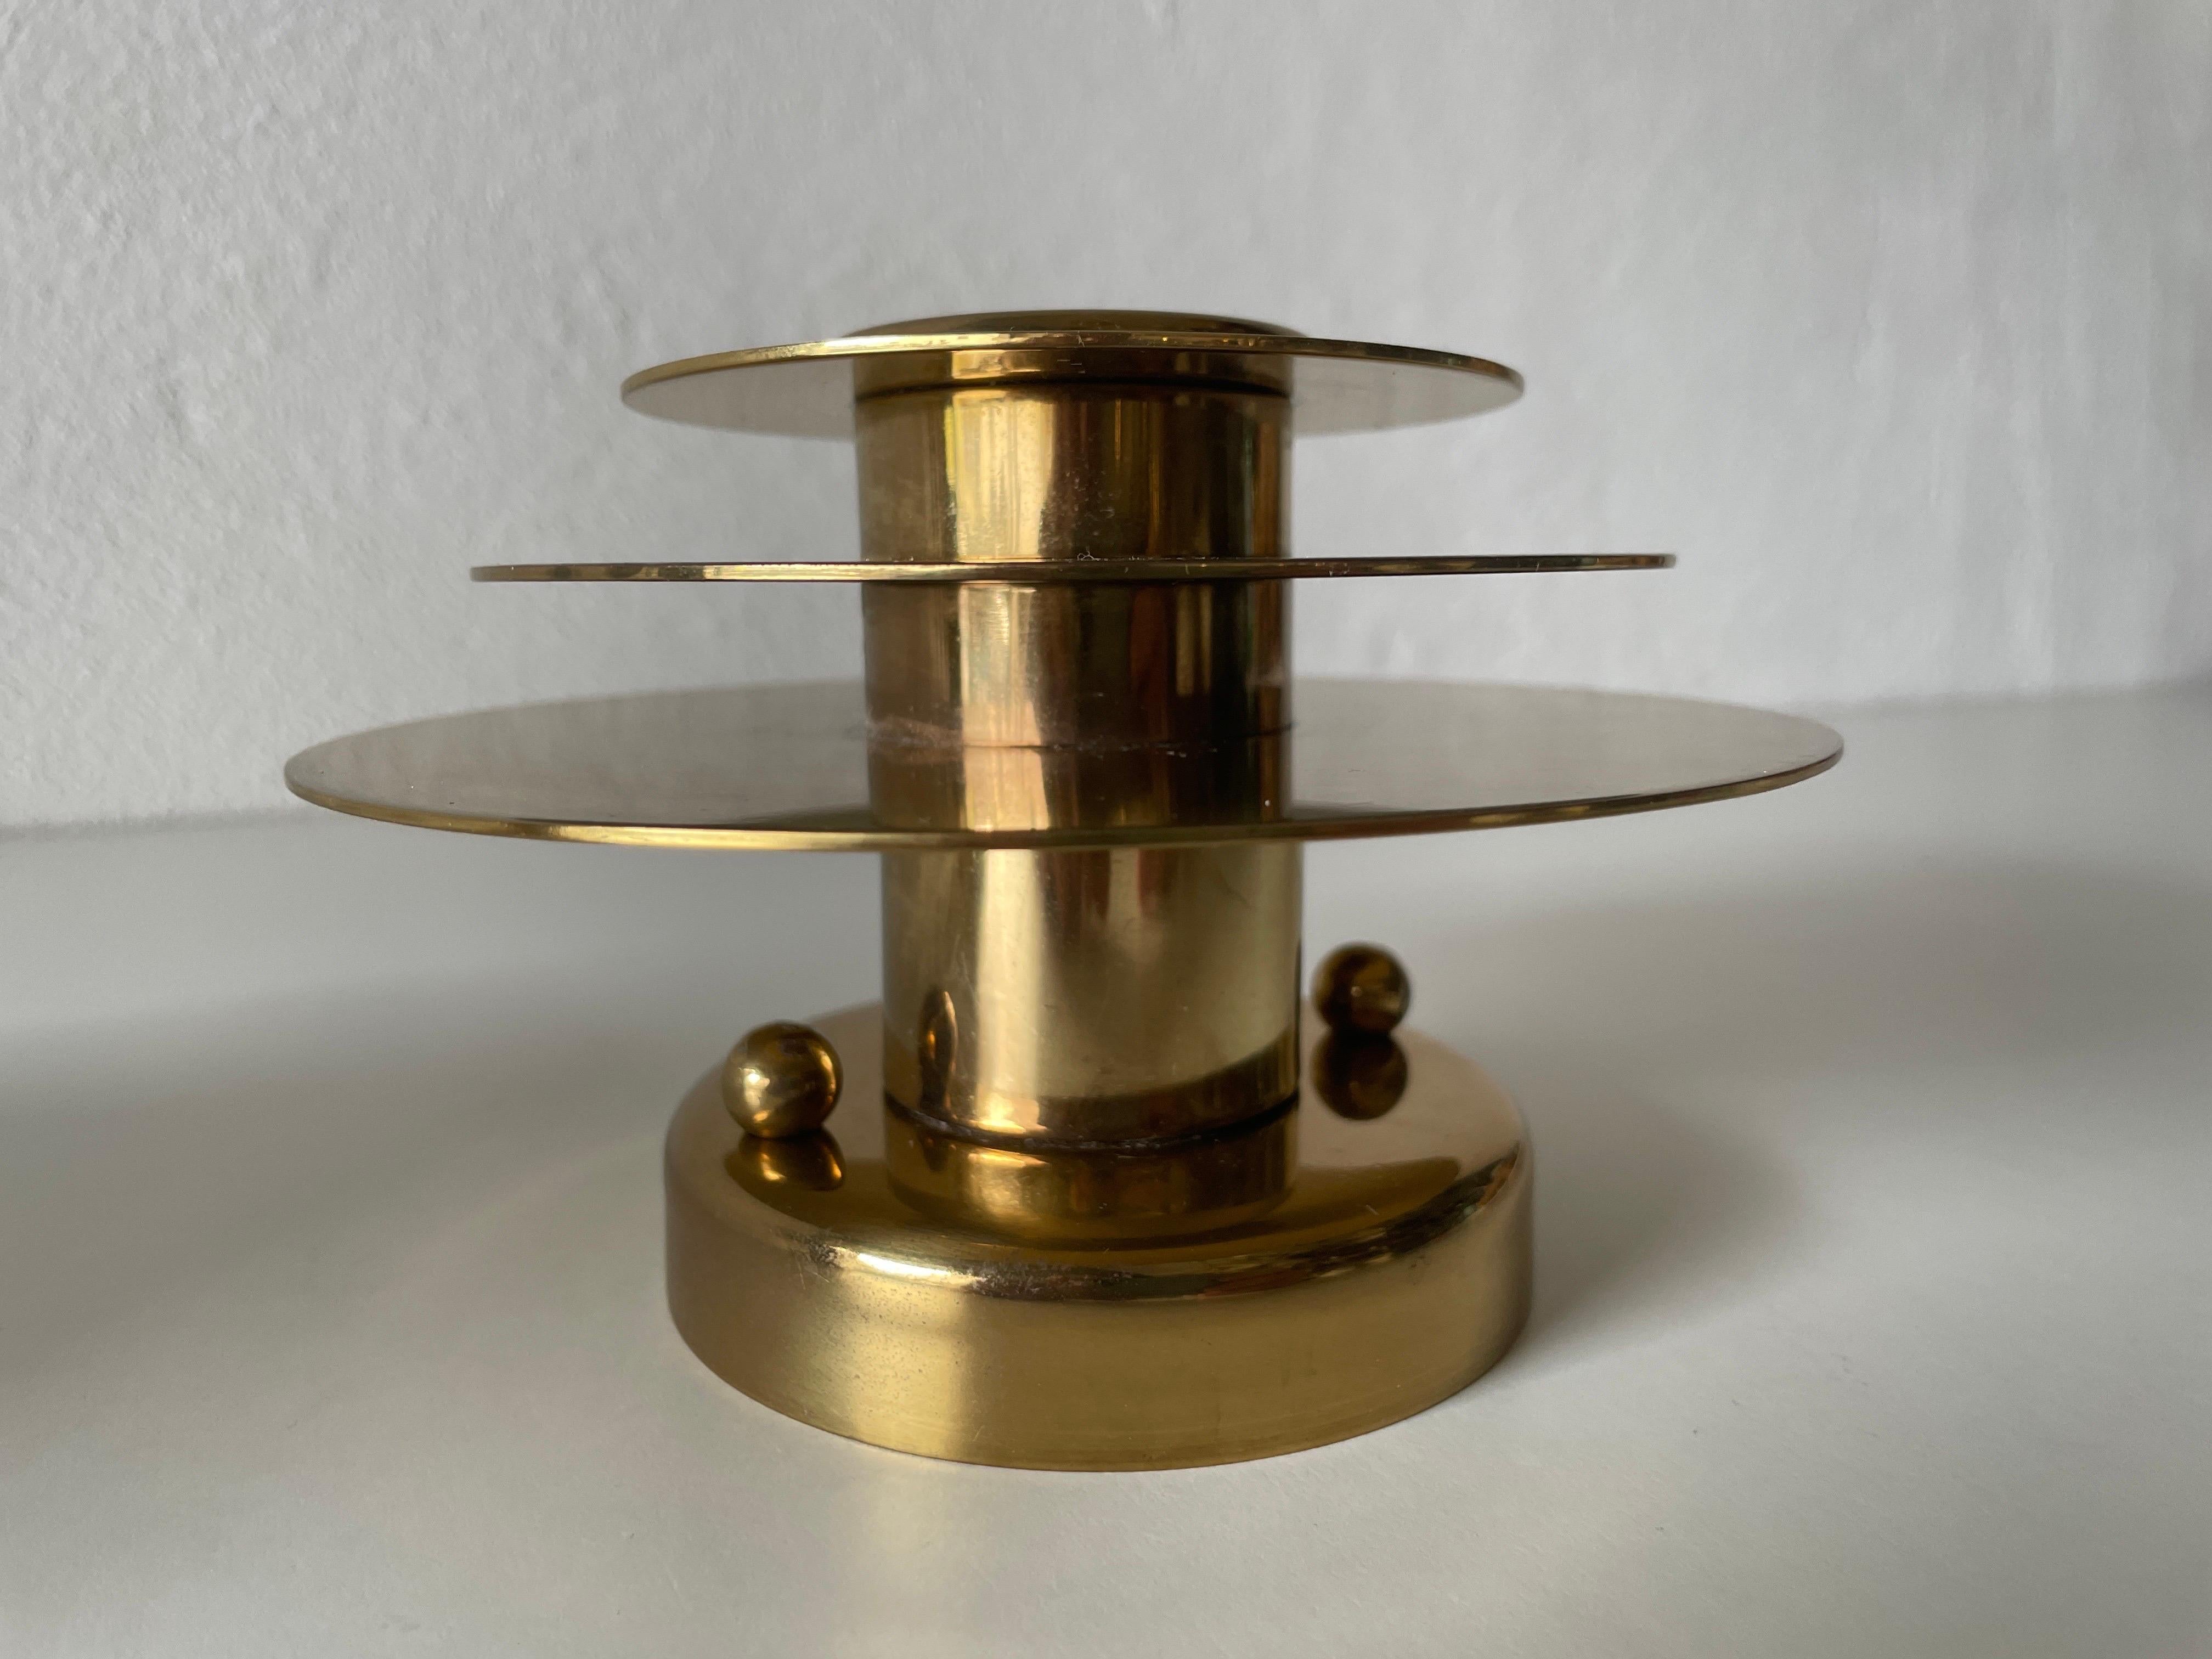 Modernist Brass Pair of Sconces or Ceiling Lamp by Schröder & Co, 1960s, Germany For Sale 6